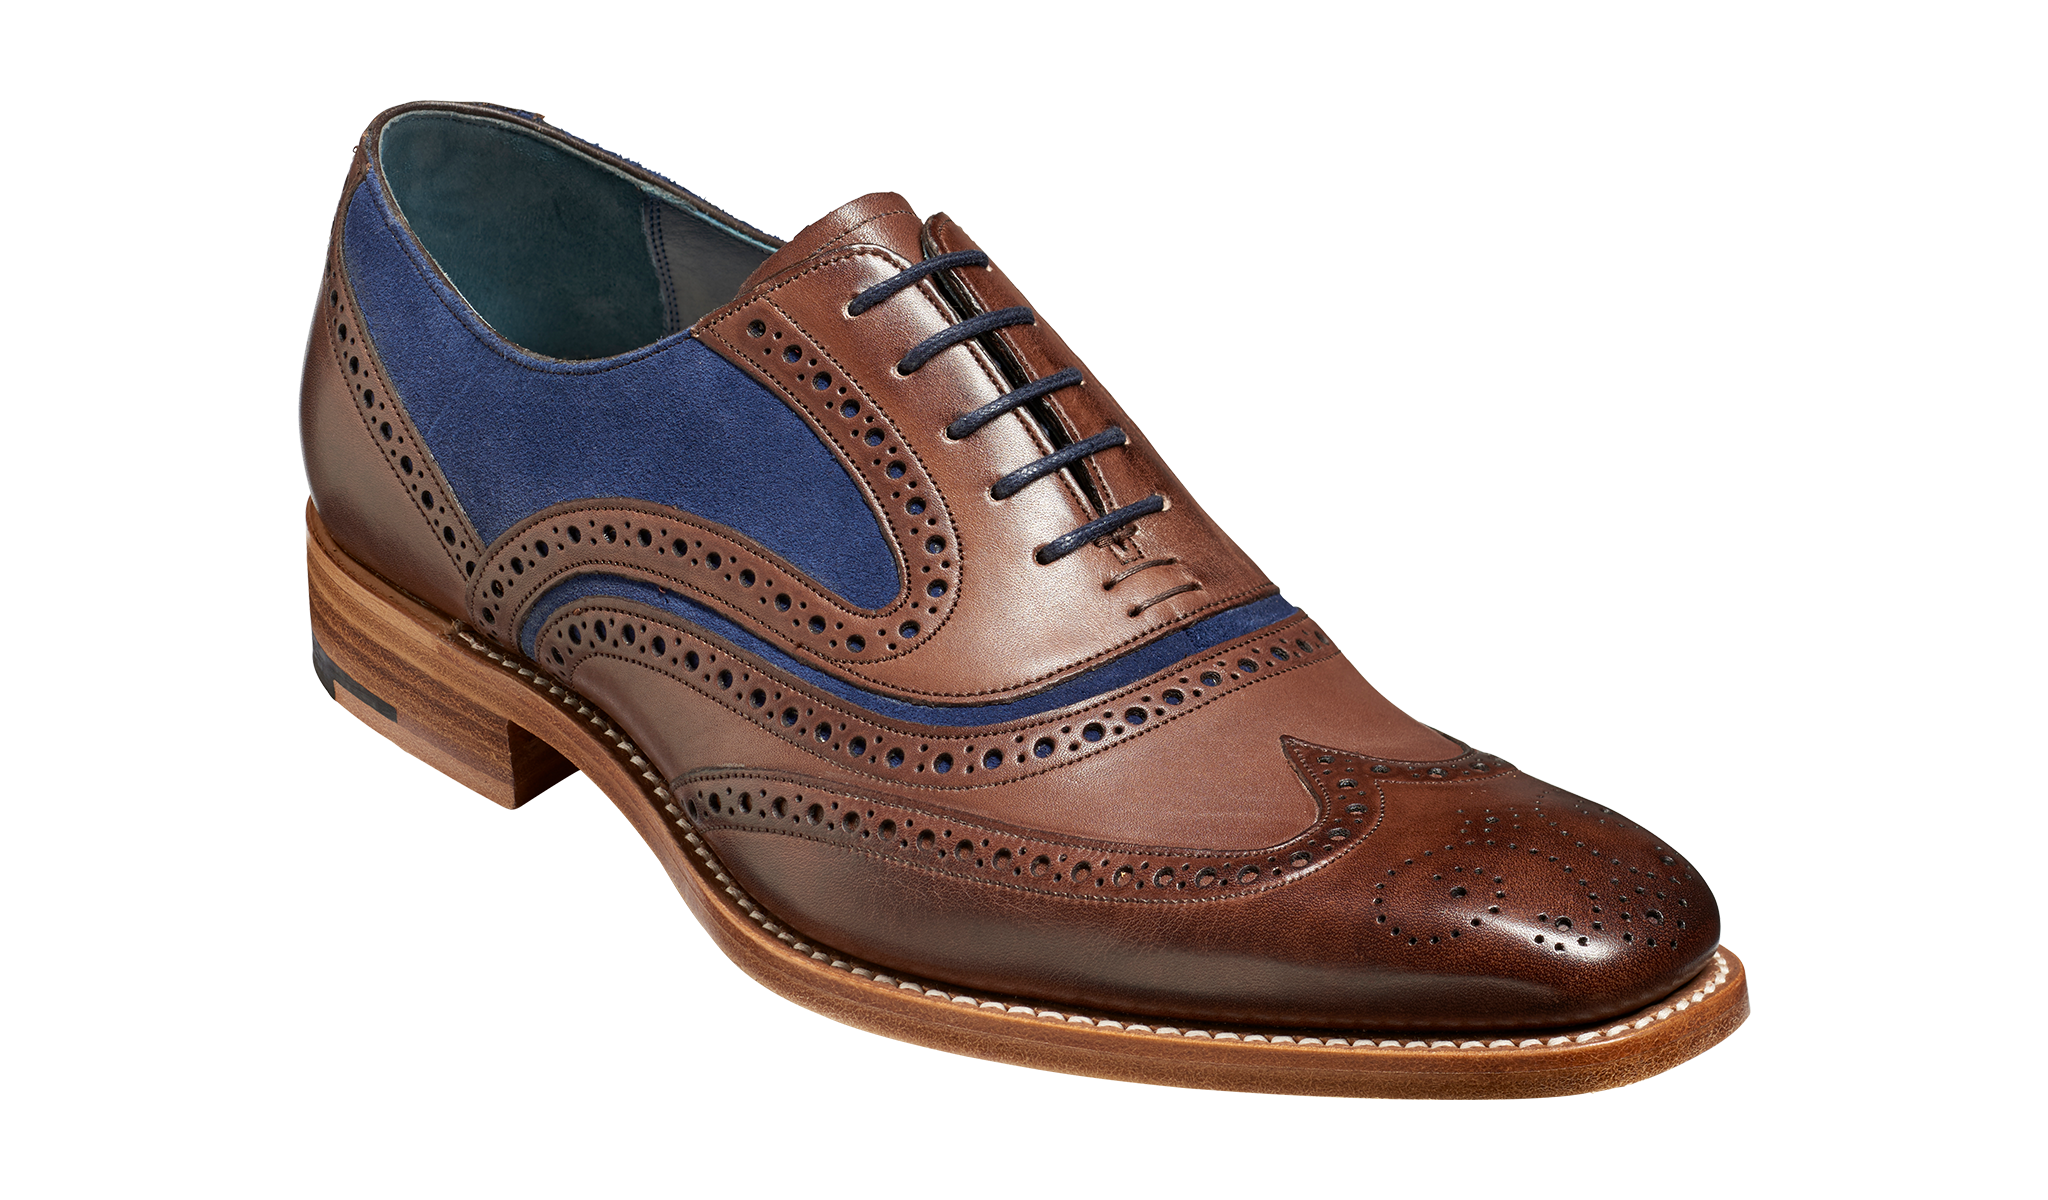 Mcclean - Mens Oxford shoes by Barker for your wedding.